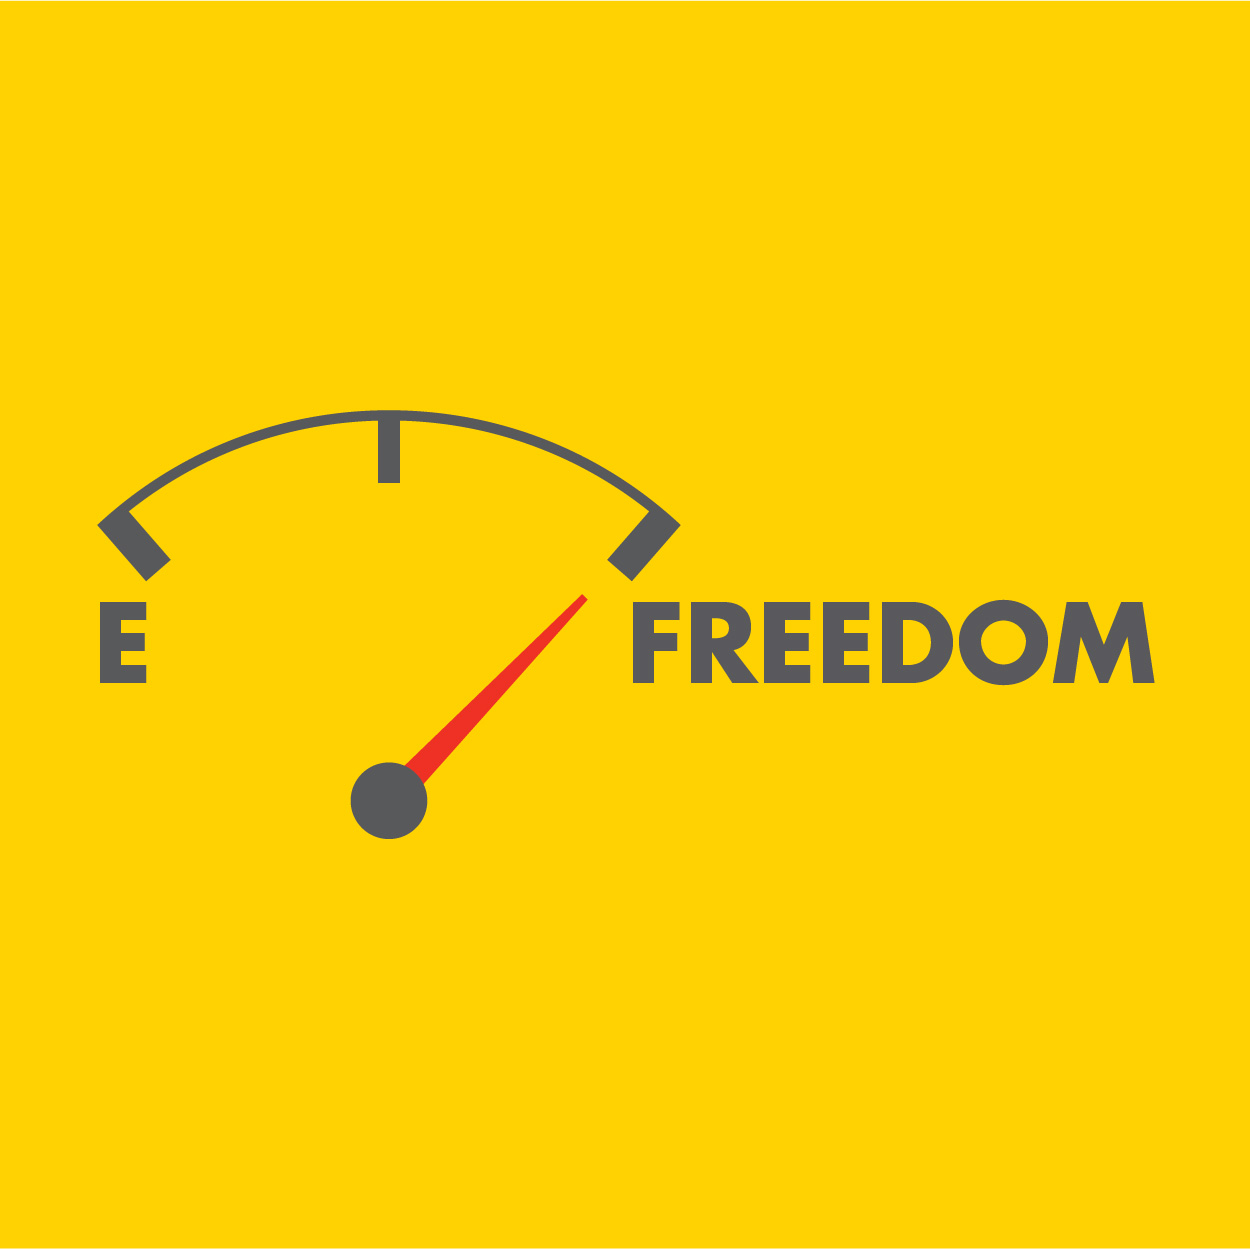 Shell FuelSave Gives you The Freedom To Do The Things You Want